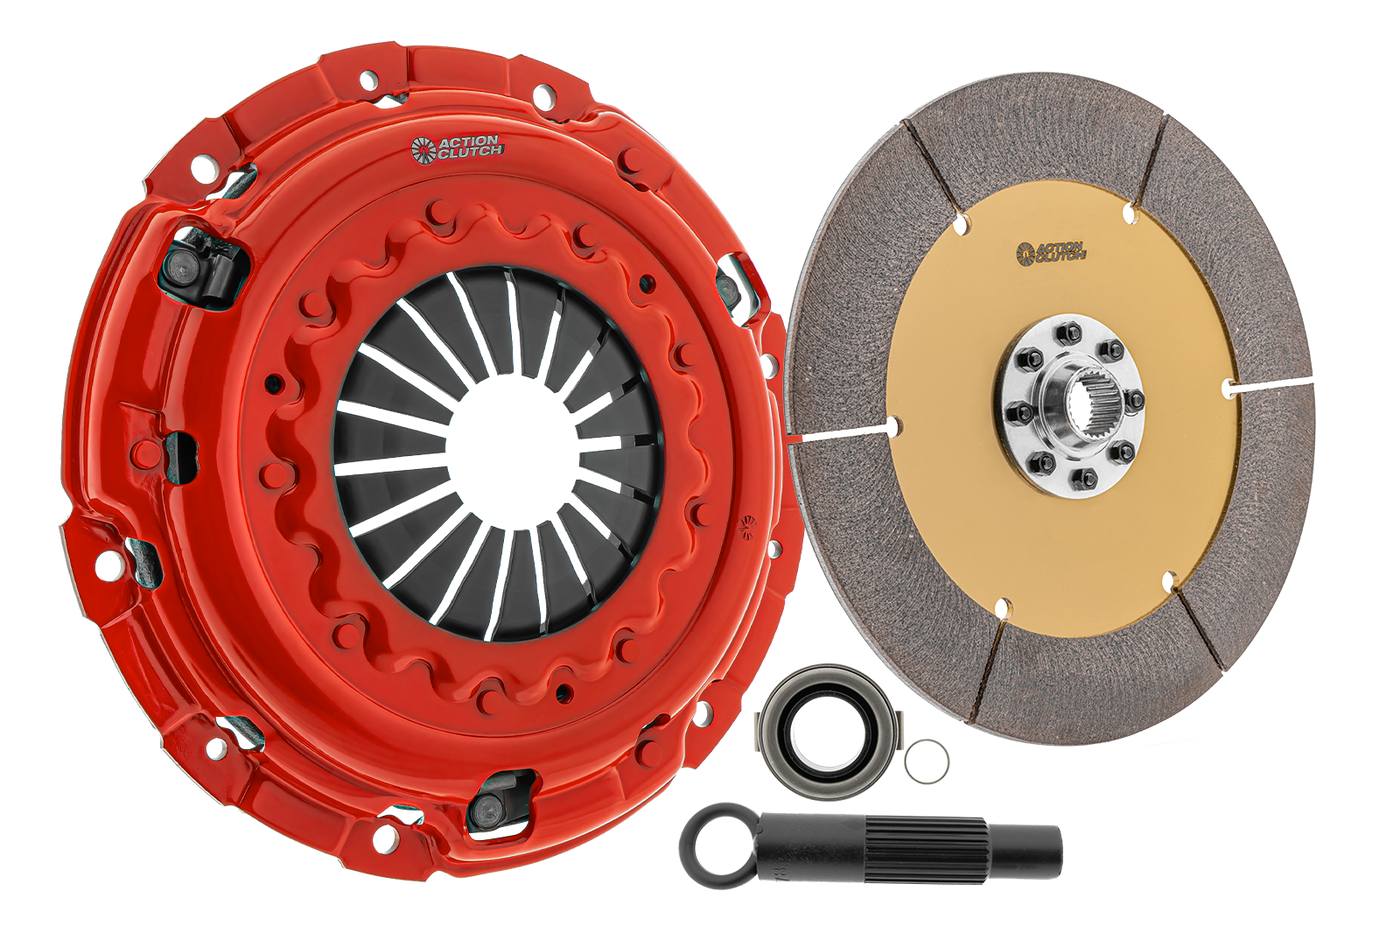 Ironman Unsprung Clutch Kit for Plymouth Laser 1990-1994 2.0L DOHC (4G63) Non-Turbo FWD